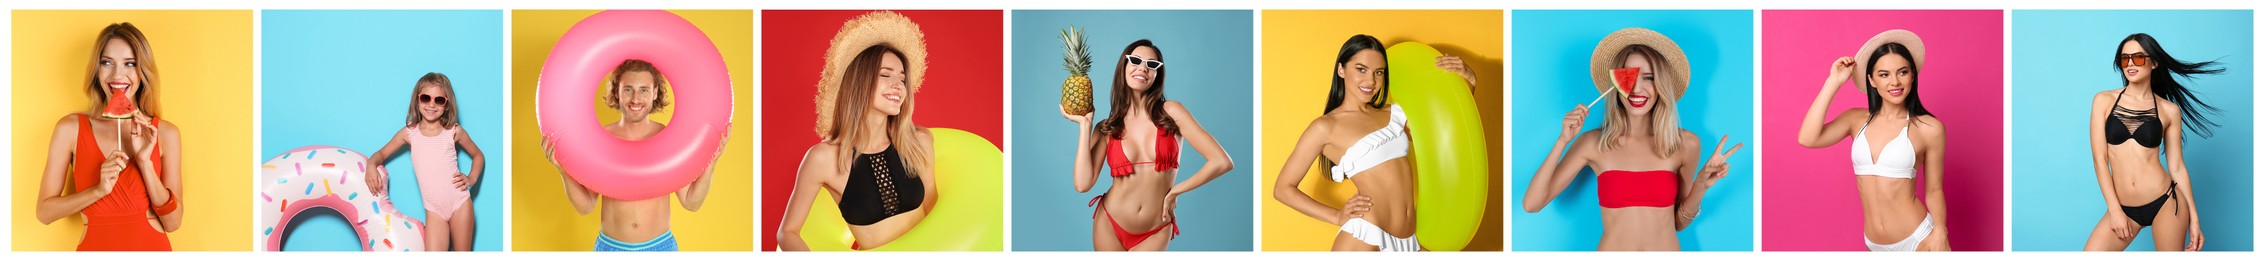 Collage with beautiful photos themed to summer party and vacation. Happy people wearing beachwear on different color backgrounds, banner design